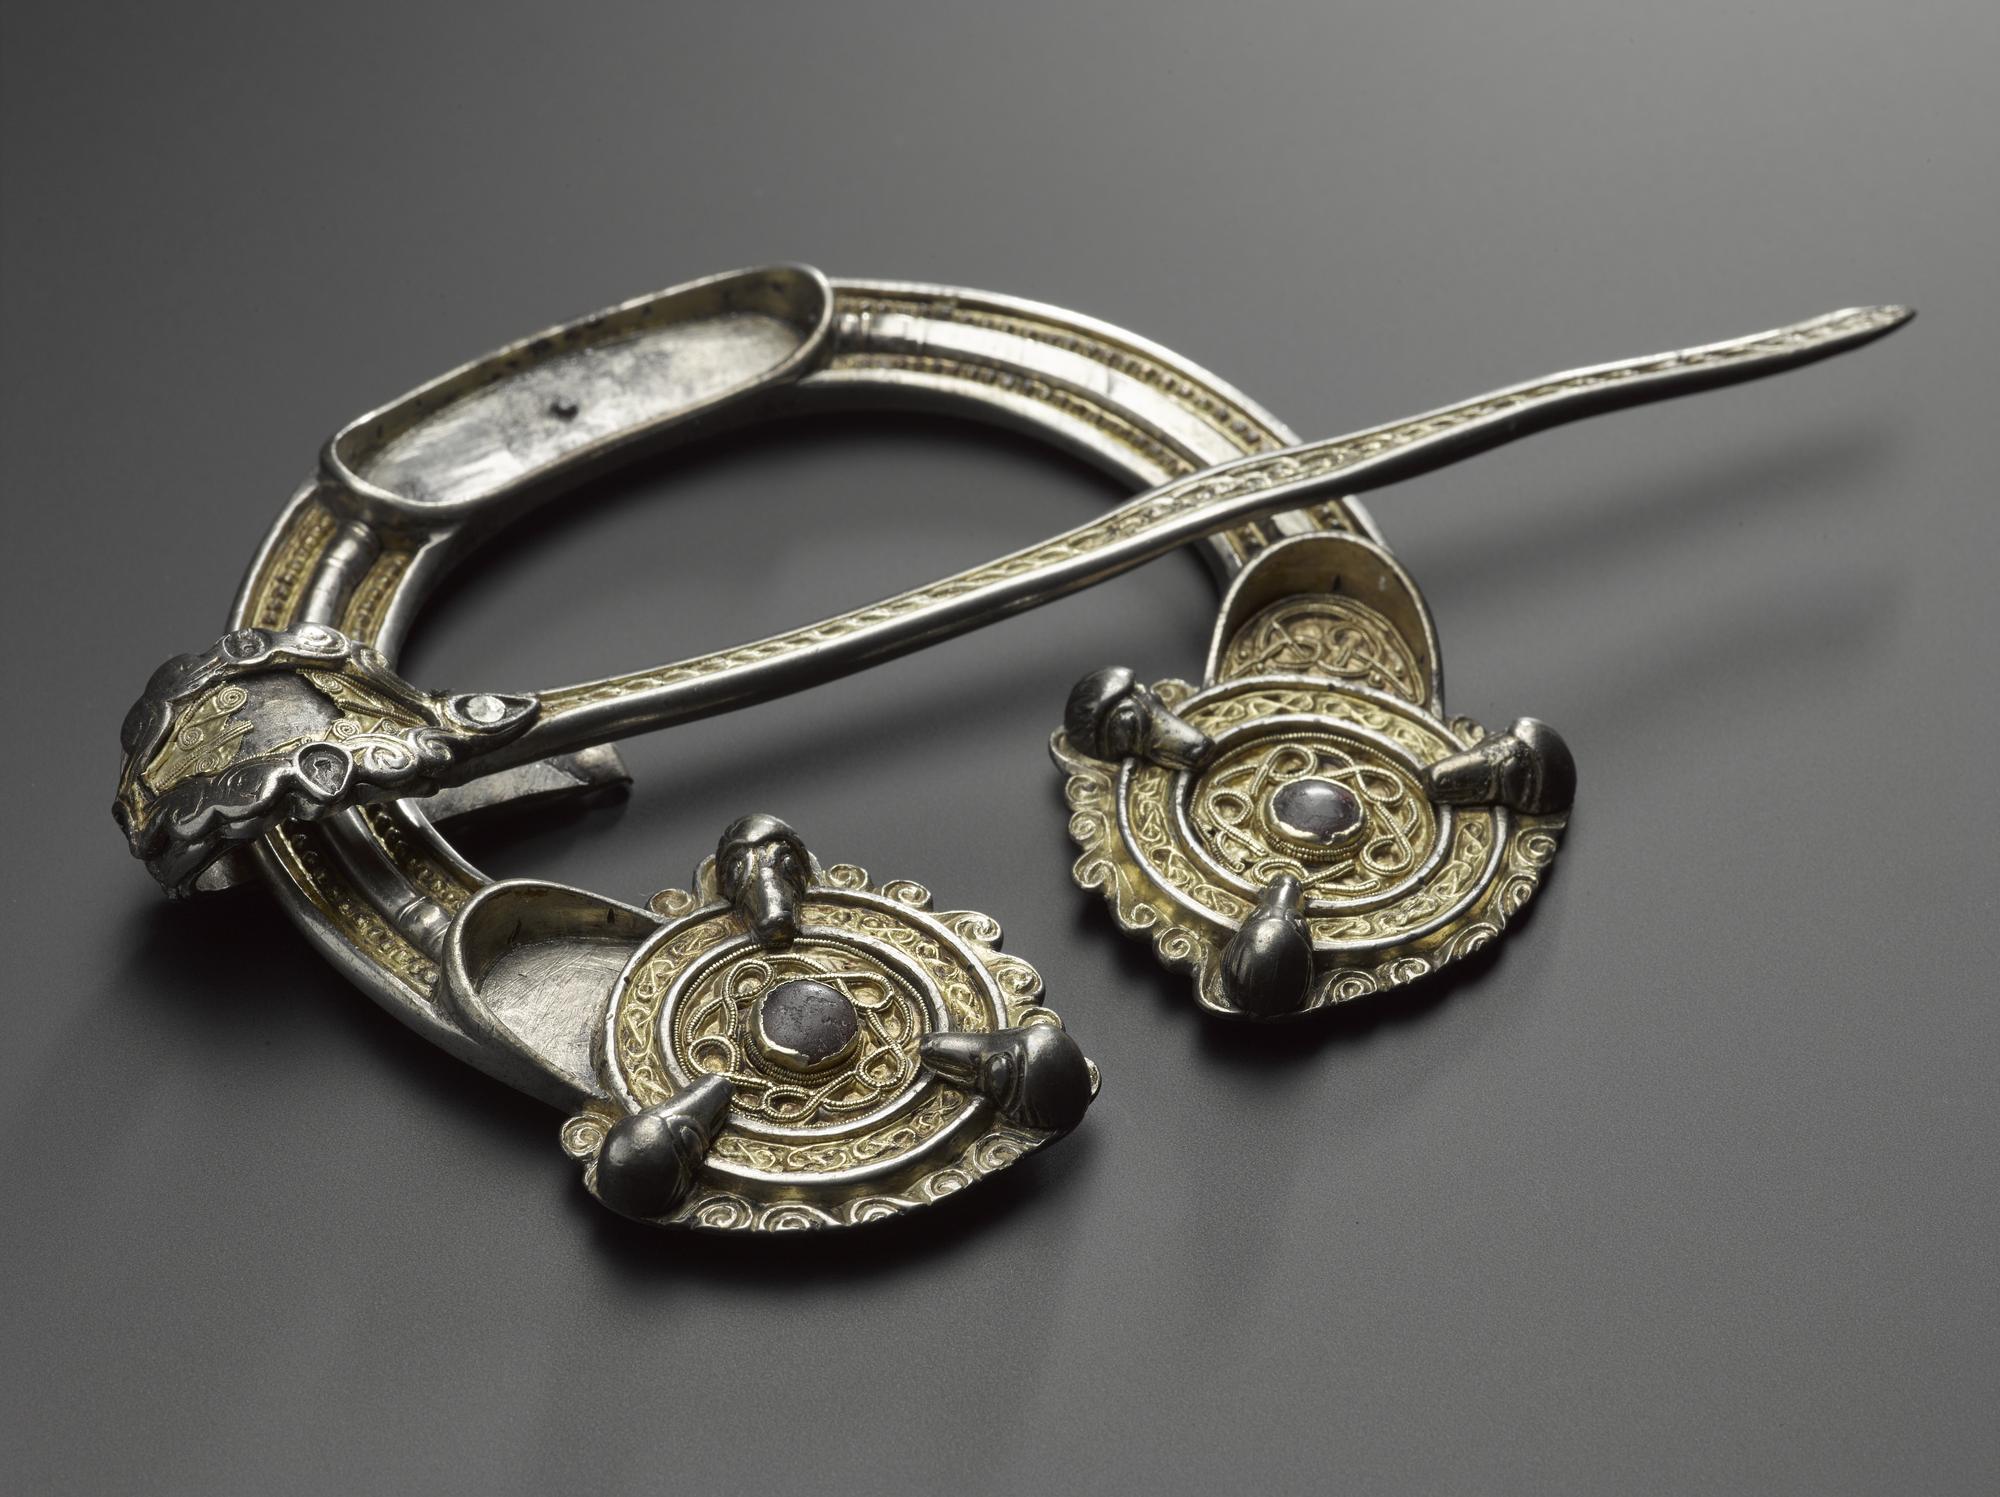 Image of Silver penannular brooch, set with gold filigree, with spiral and zoomorphic decoration, Pictish, from near Clunie Castle, Dunkeld, Perthshire, 8th or 9th century © National Museums Scotland